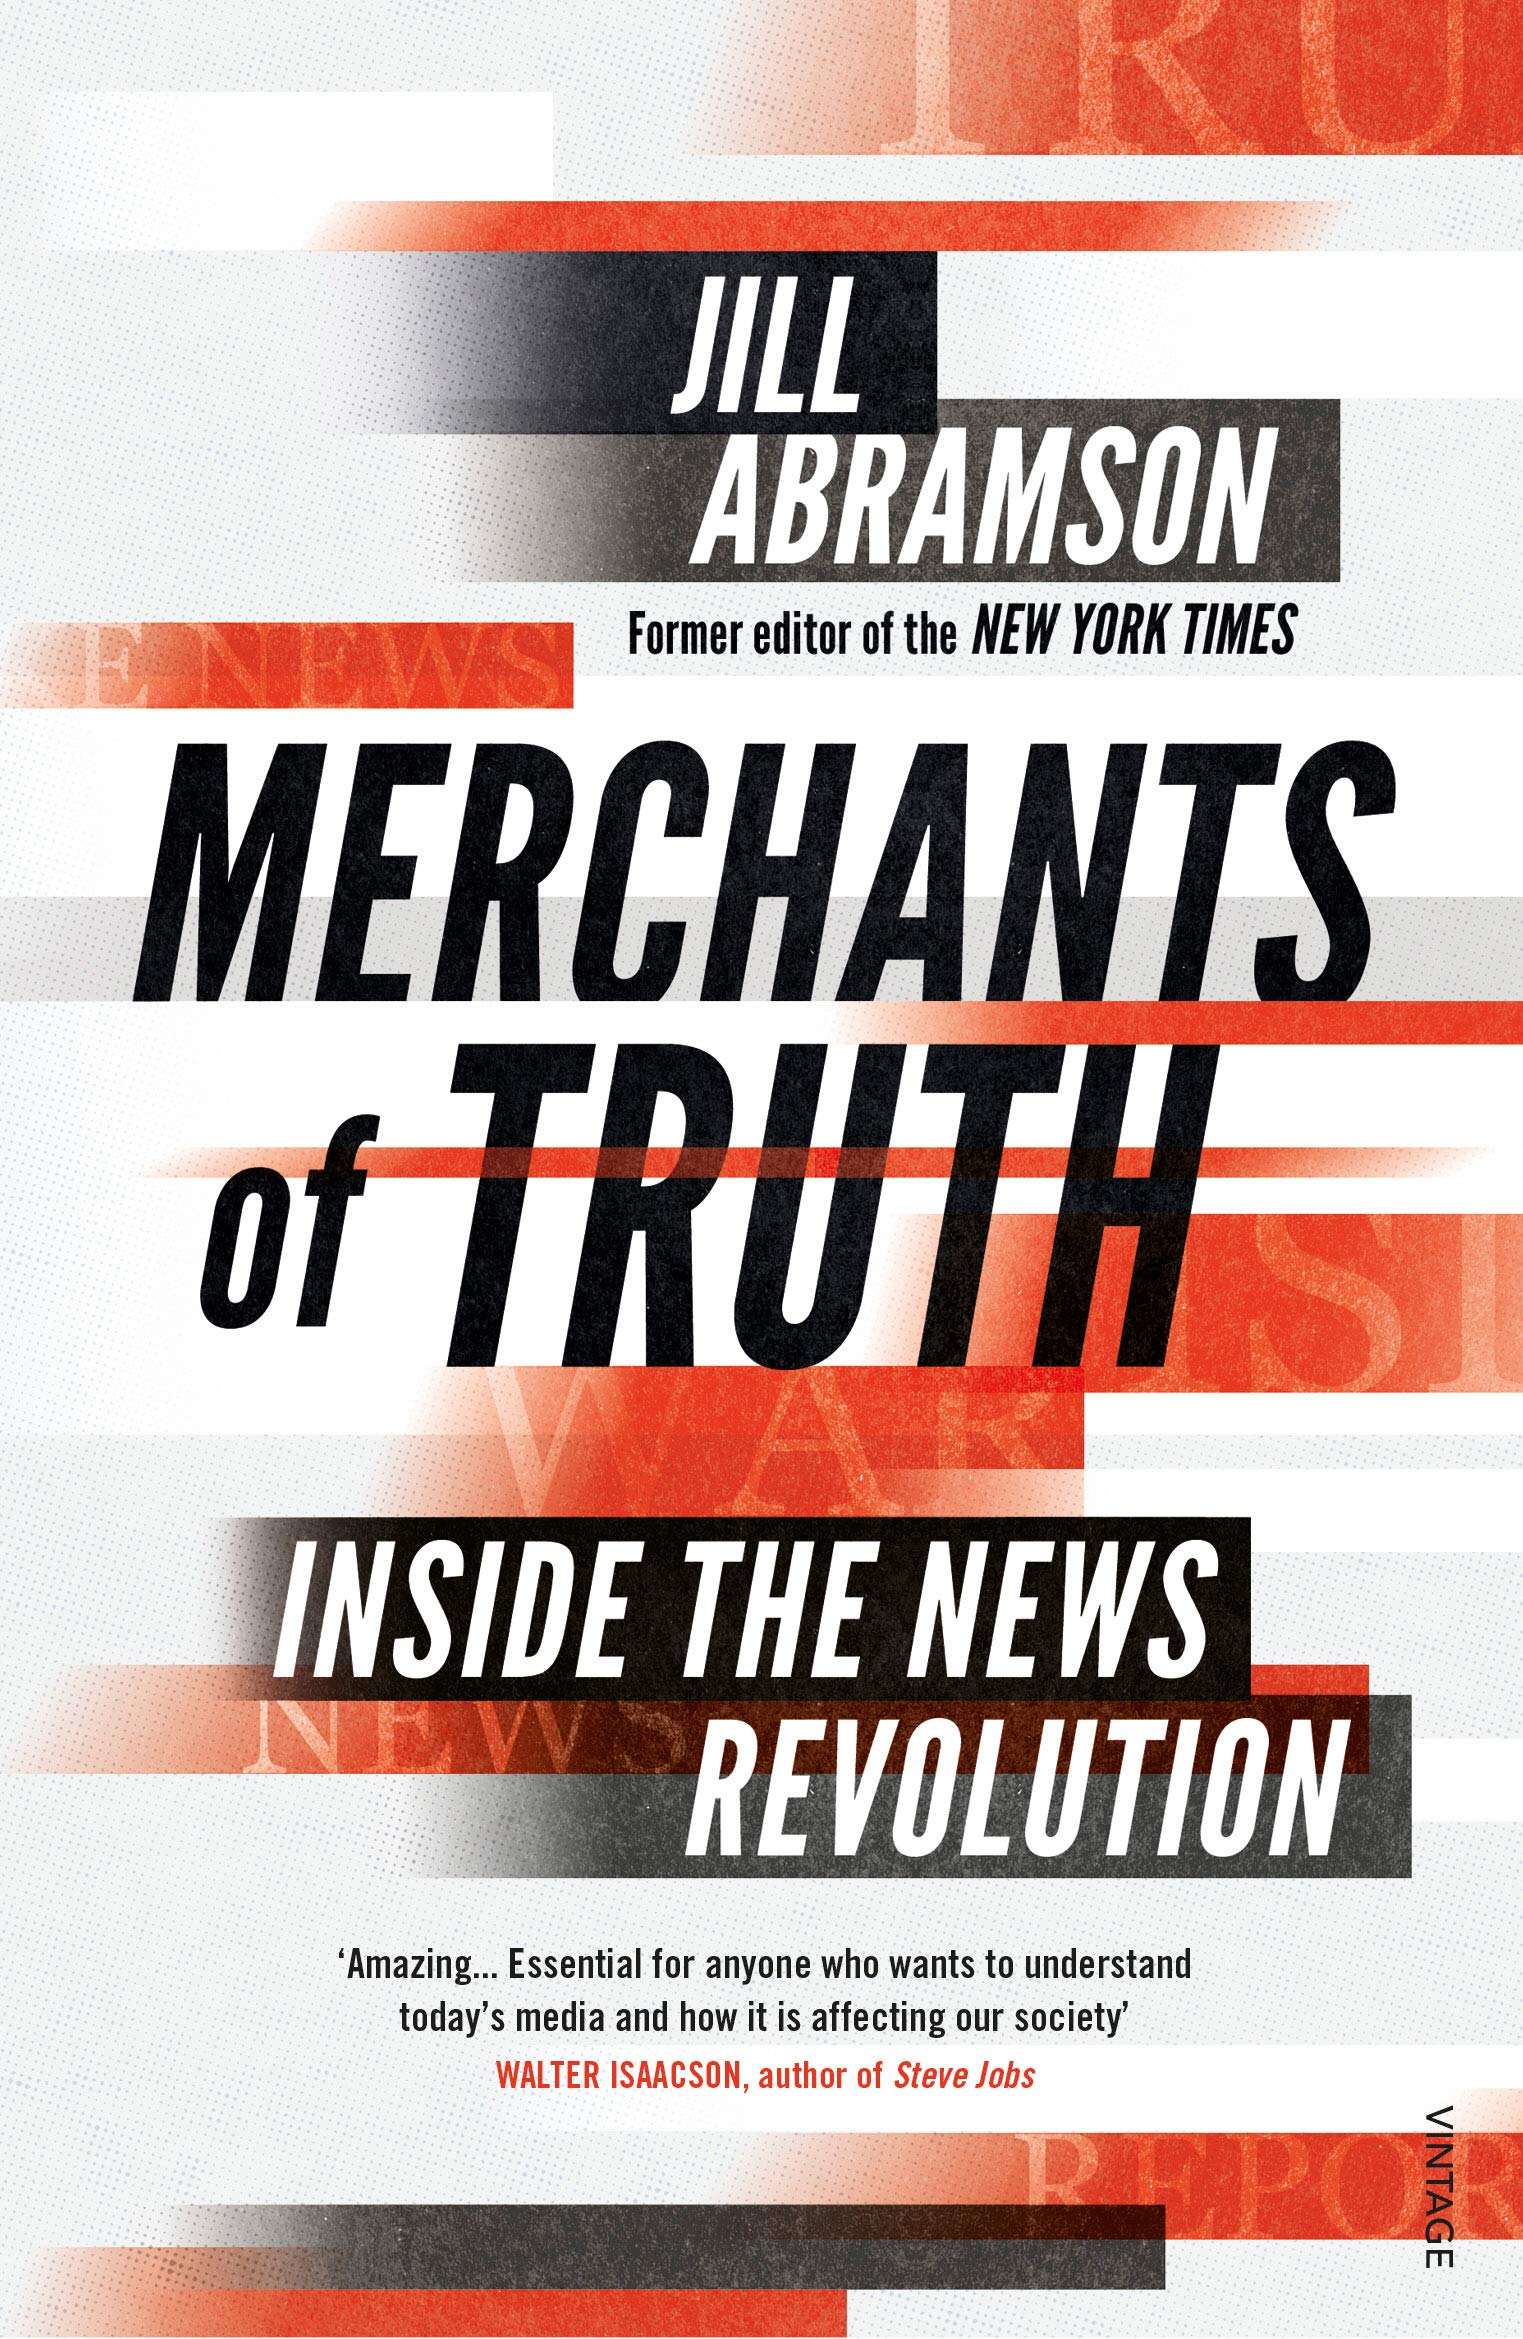 Merchants of Truth: The Business of News and the Fight for Facts